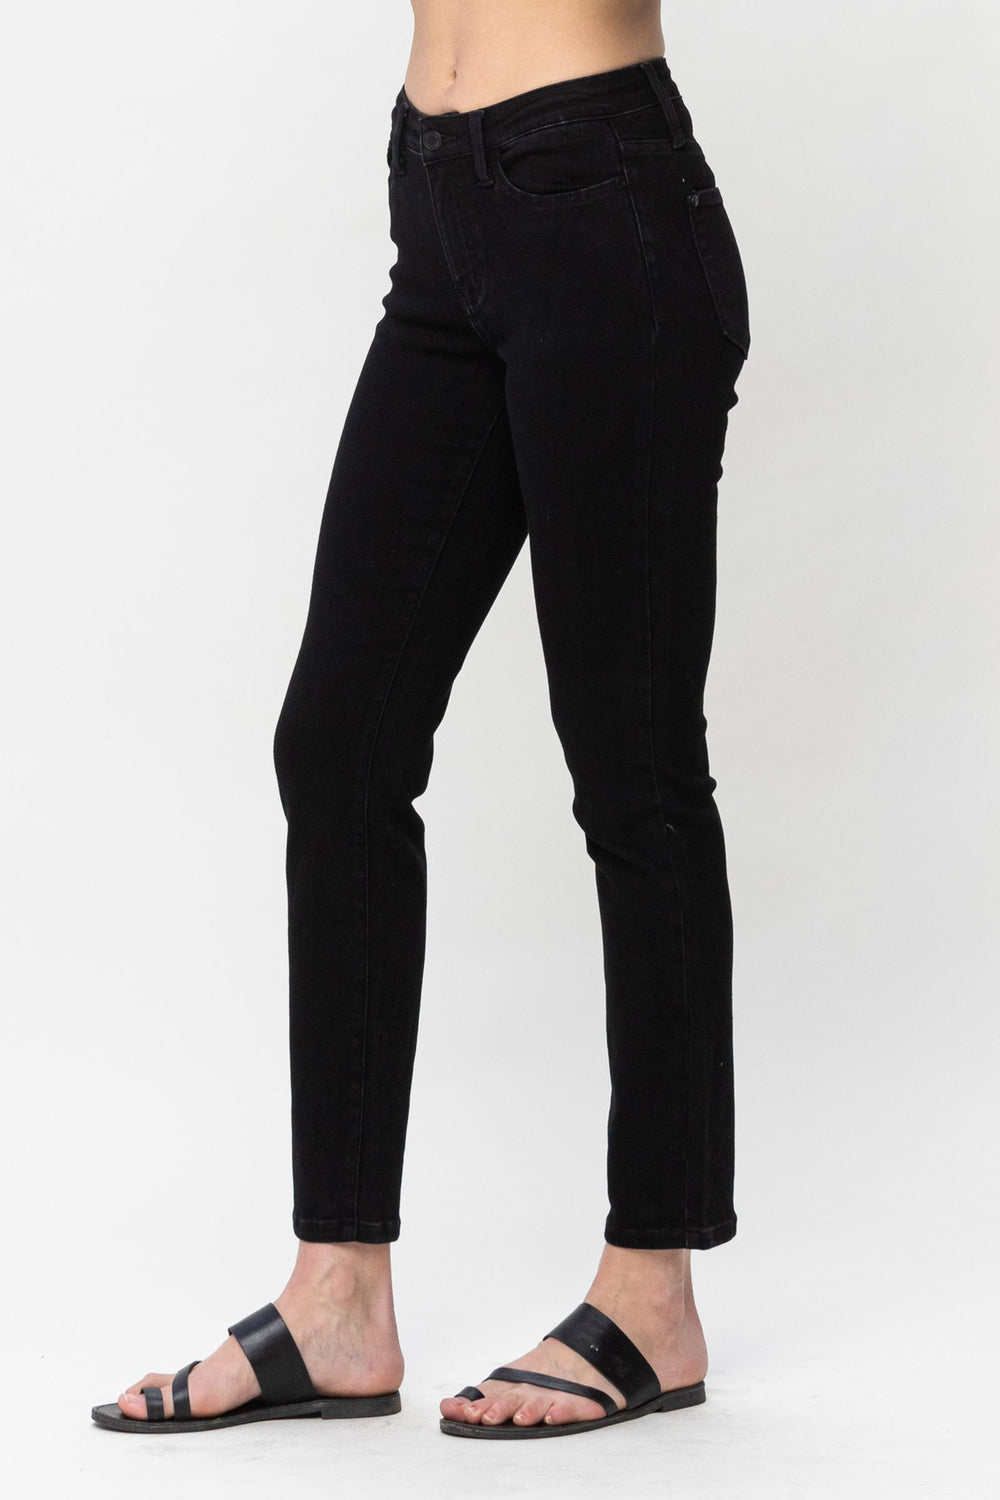 Jodi Mid-Rise Black Slim Fit Denim, Judy Blue-Denim-Inspired by Justeen-Women's Clothing Boutique in Chicago, Illinois